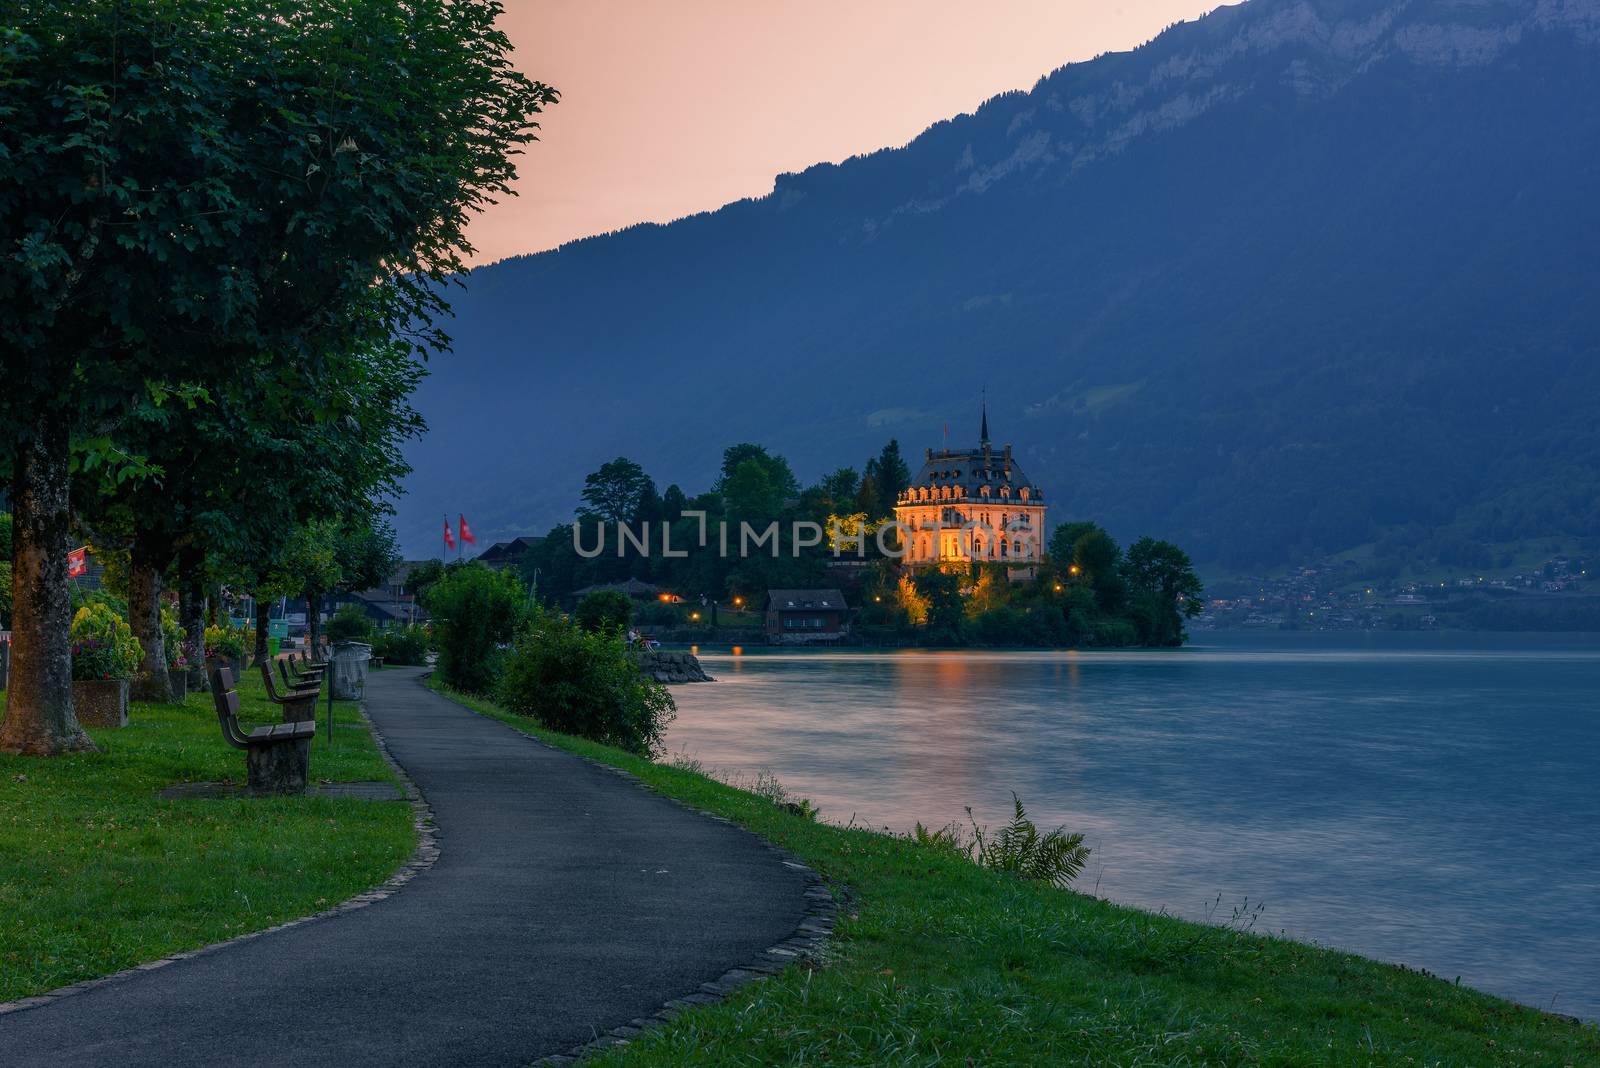 Sunset at the Iseltwald peninsula and forme castle in Switzerland, now Rehabilitation Center of Seeburg, with a public park, benches and a walkway in the foreground. Long exposure.